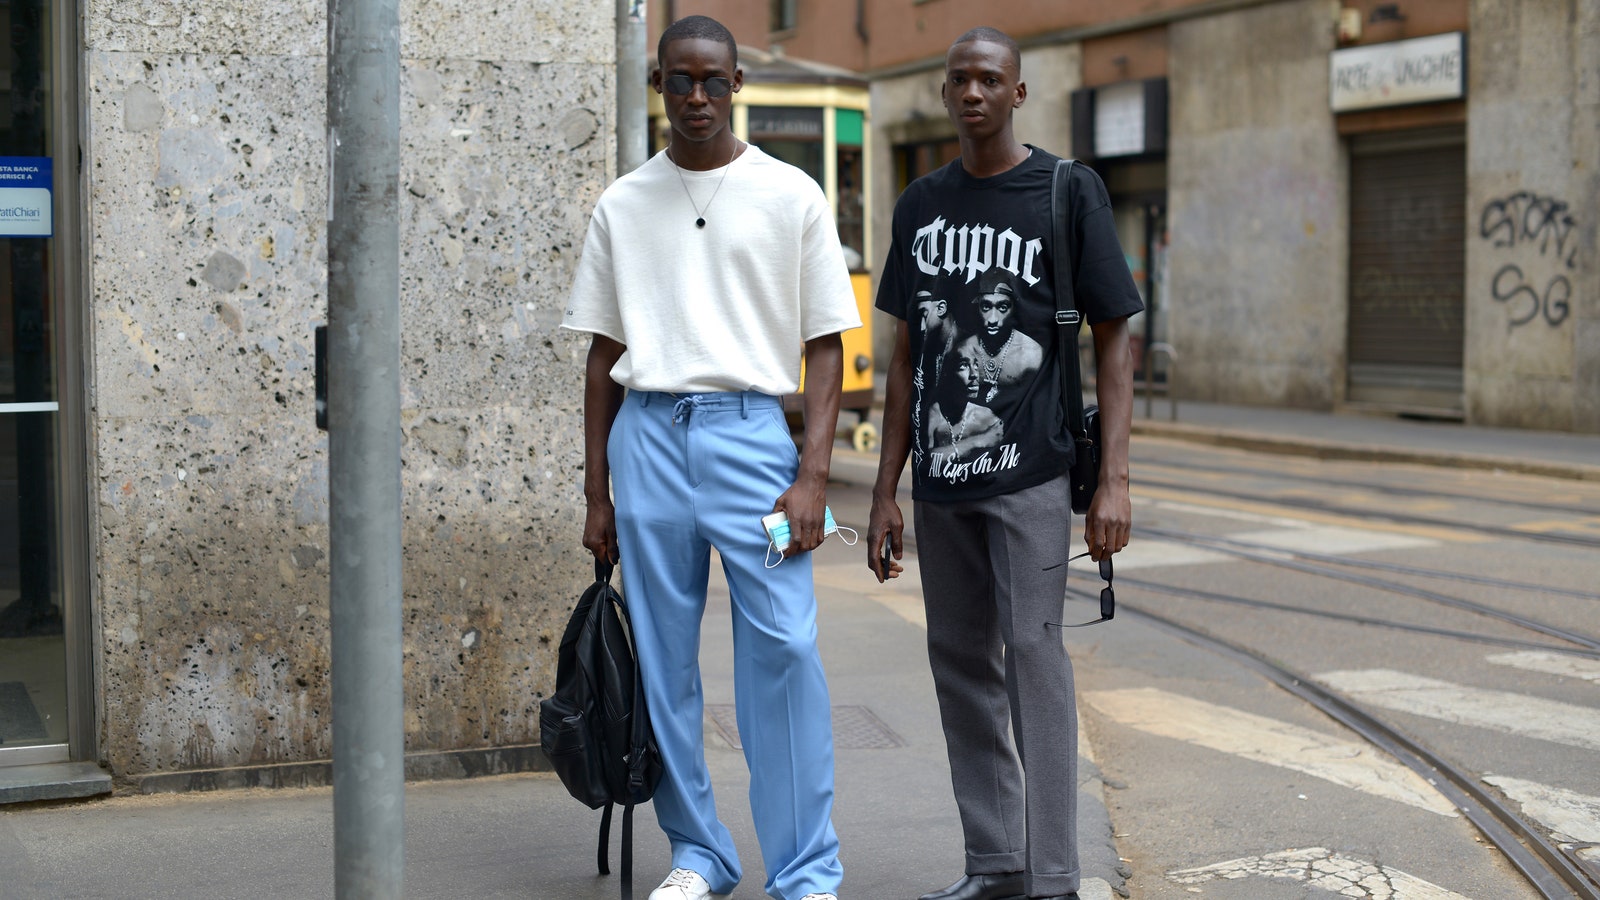 The Best Street Style From the Spring 2022 Menswear Shows in Milan